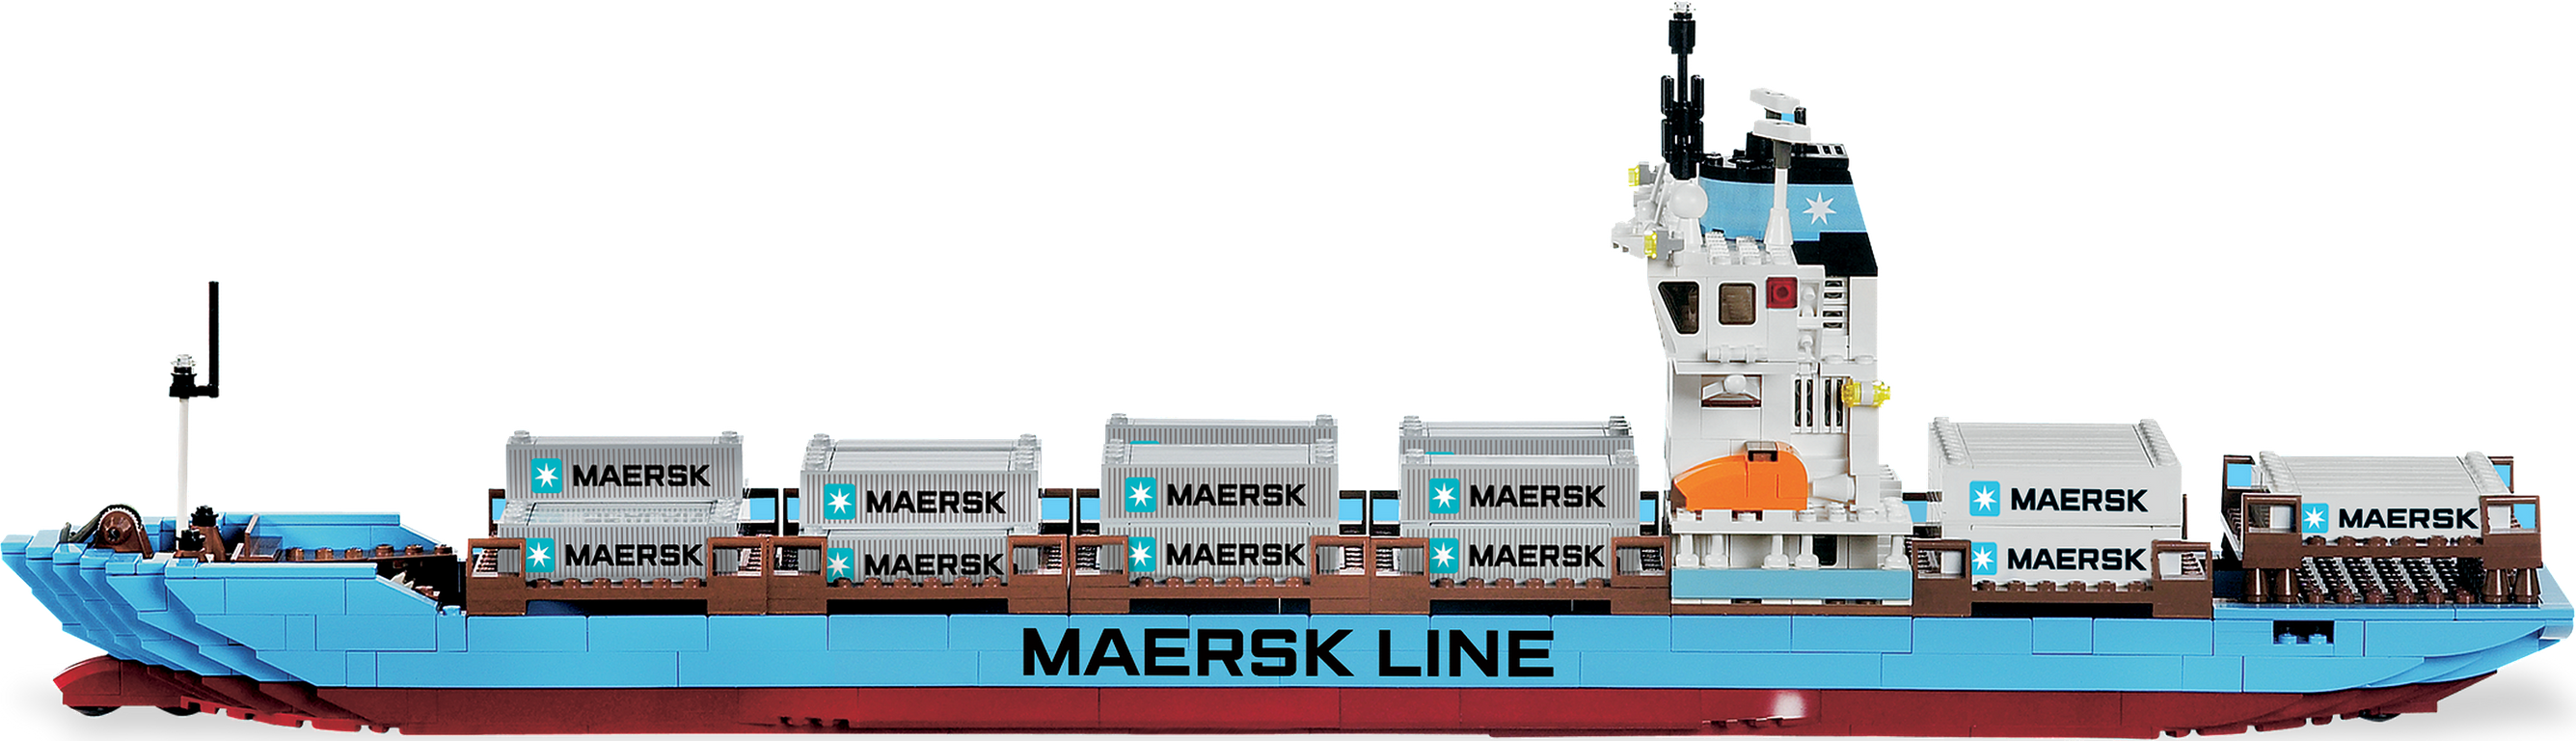 Maersk Container Ship composants